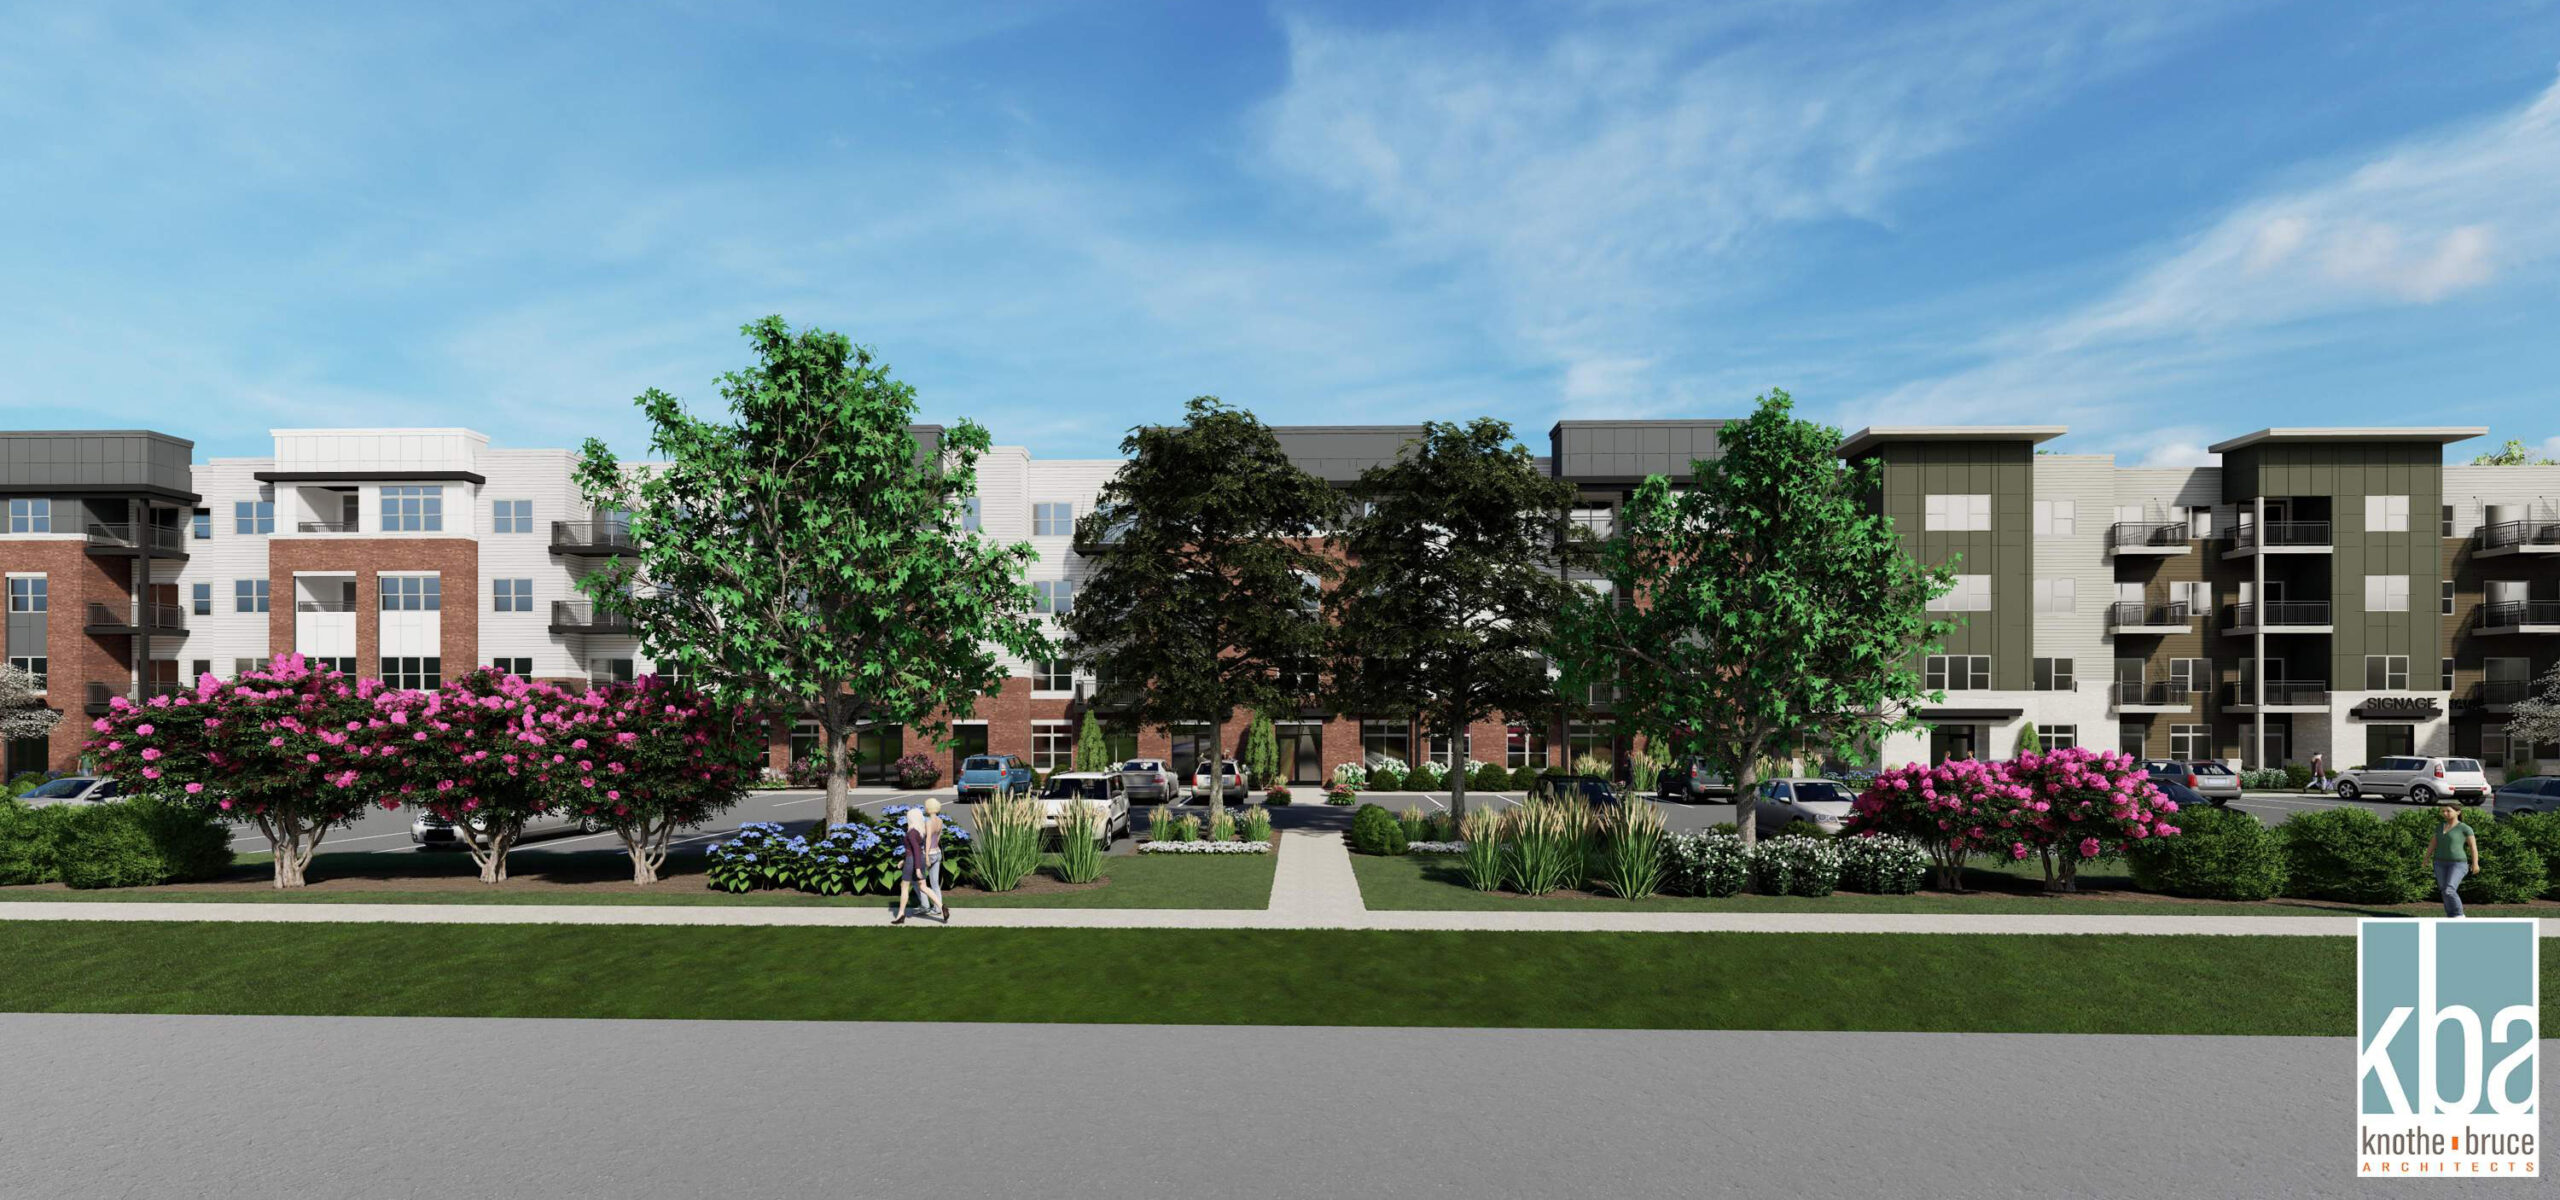 McShane to Build Affordable Housing Residence in Brookfield, Wisconsin